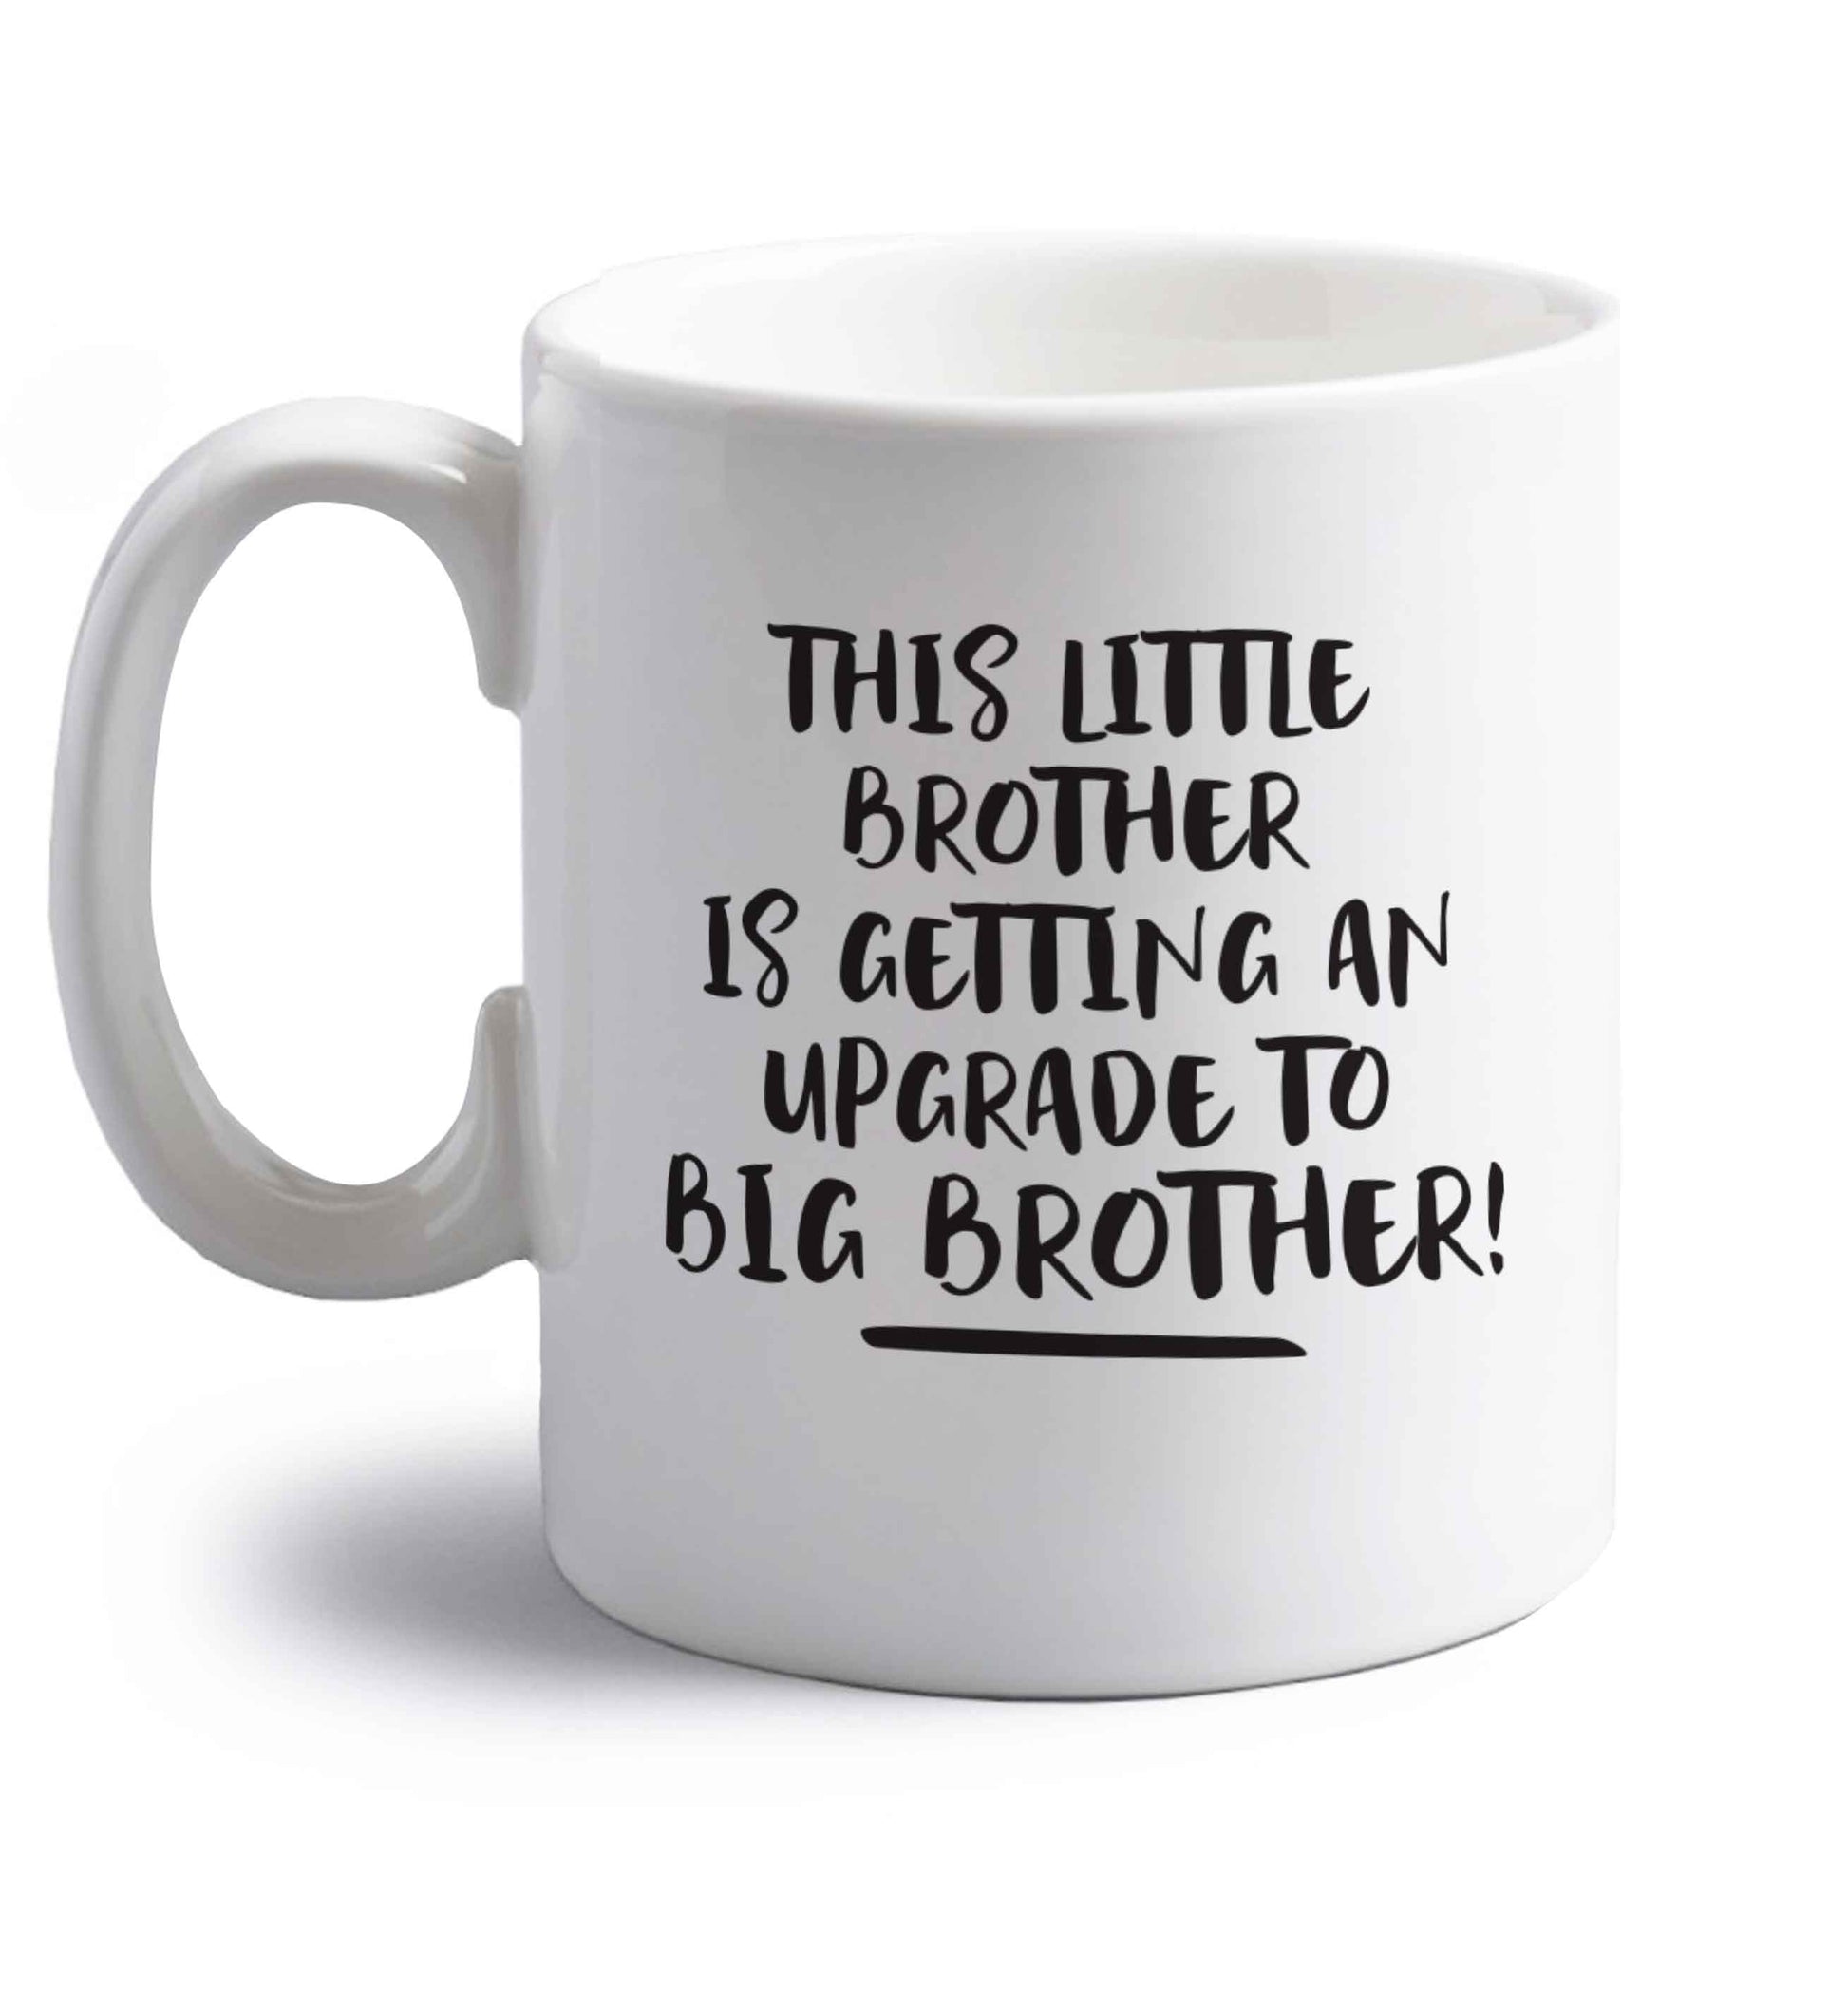 This little brother is getting an upgrade to big brother! right handed white ceramic mug 